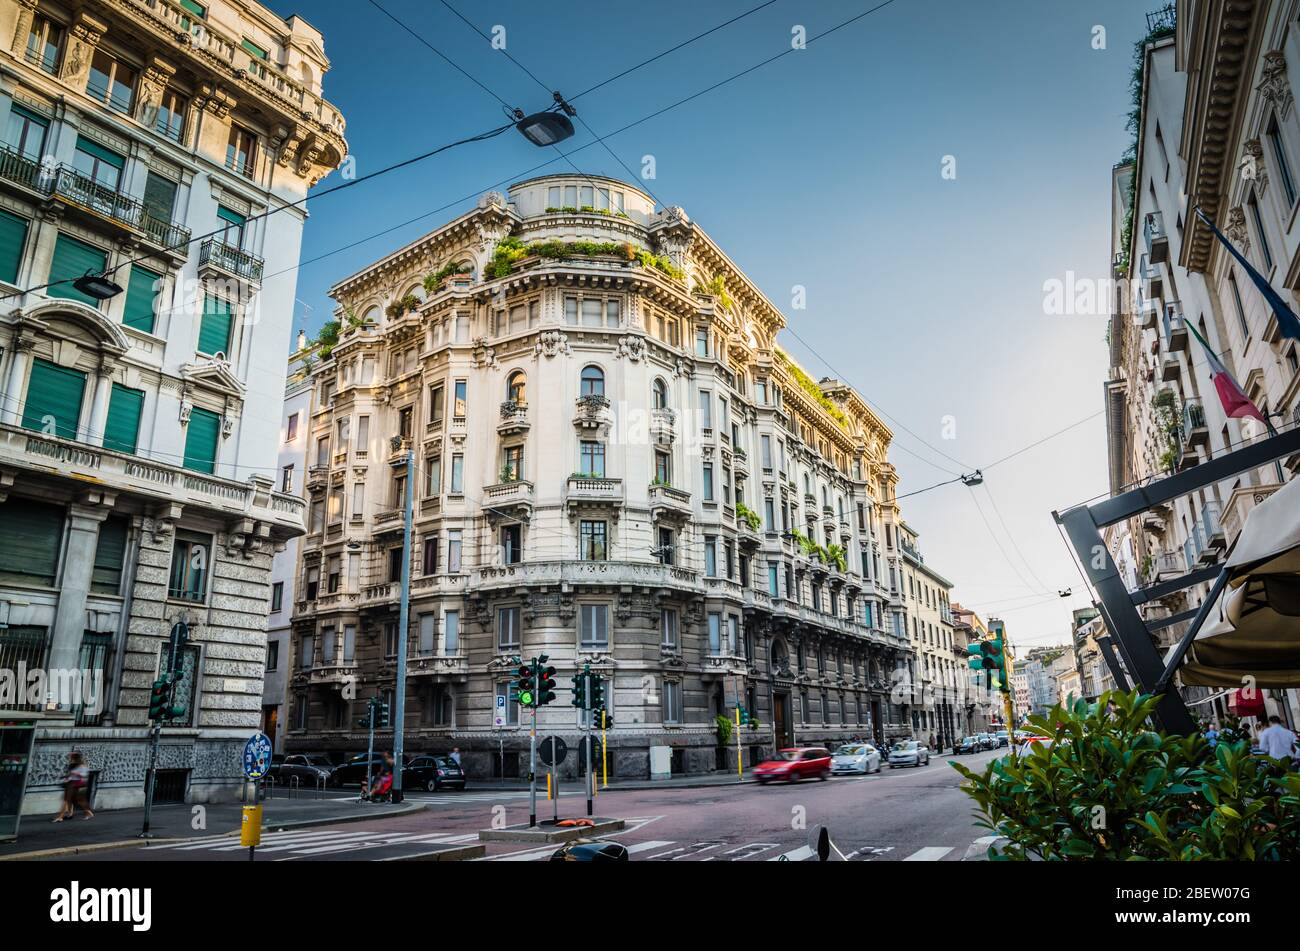 Corner of old typical building with balconies, windows, moulding, stucco work and greenery on roof on main street Corso Venezia in centre of Milan Mil Stock Photo